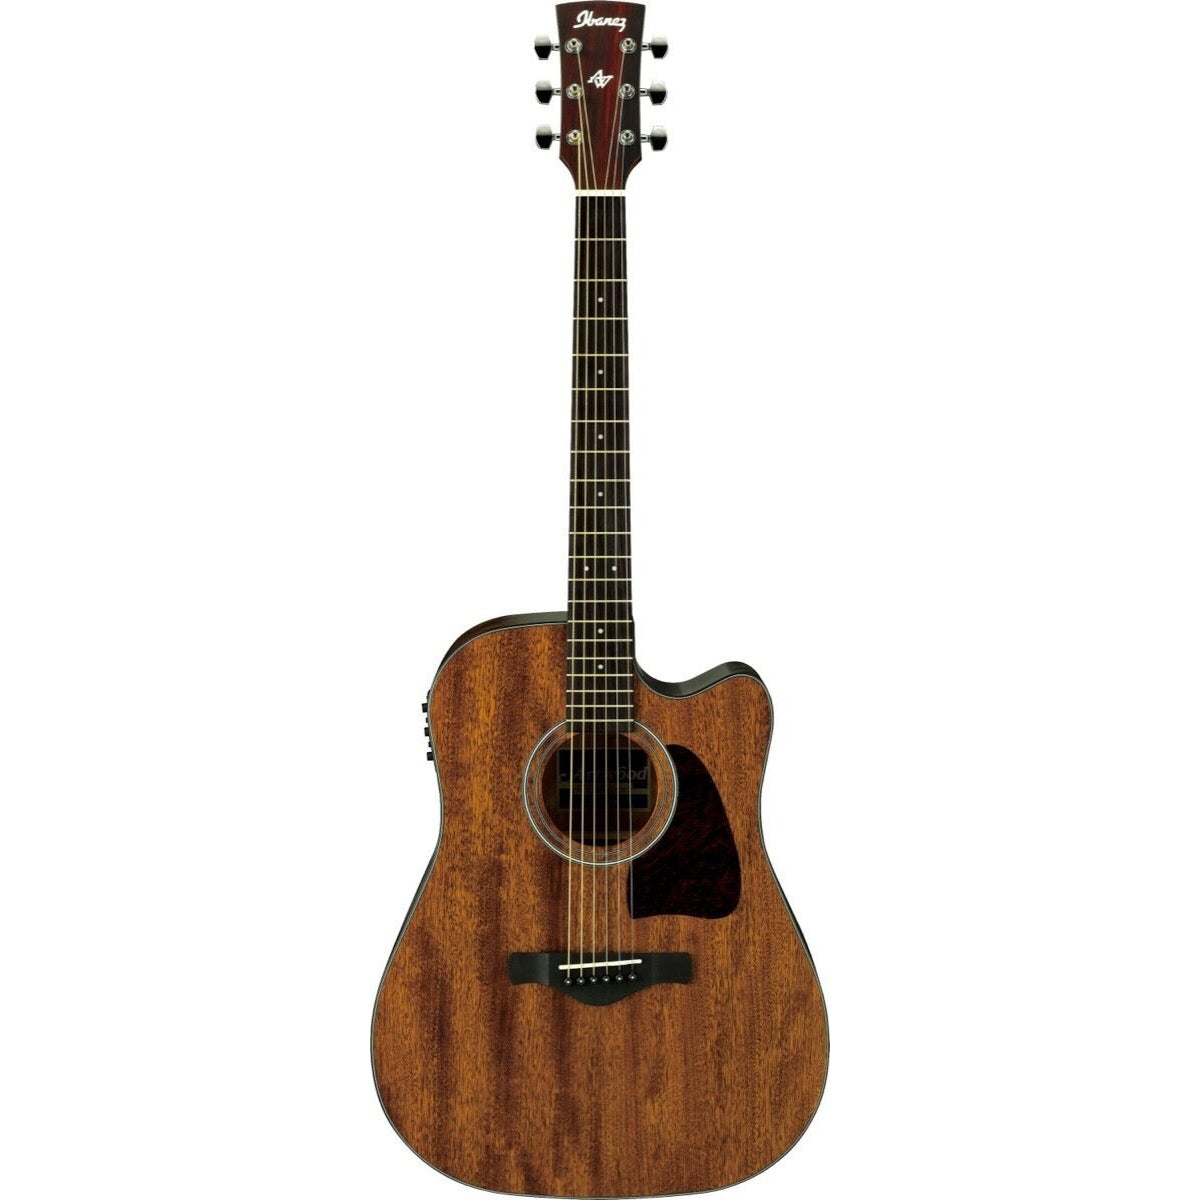 Ibanez AW54CE Artwood Acoustic-Electric Guitar, Open Pore Natural